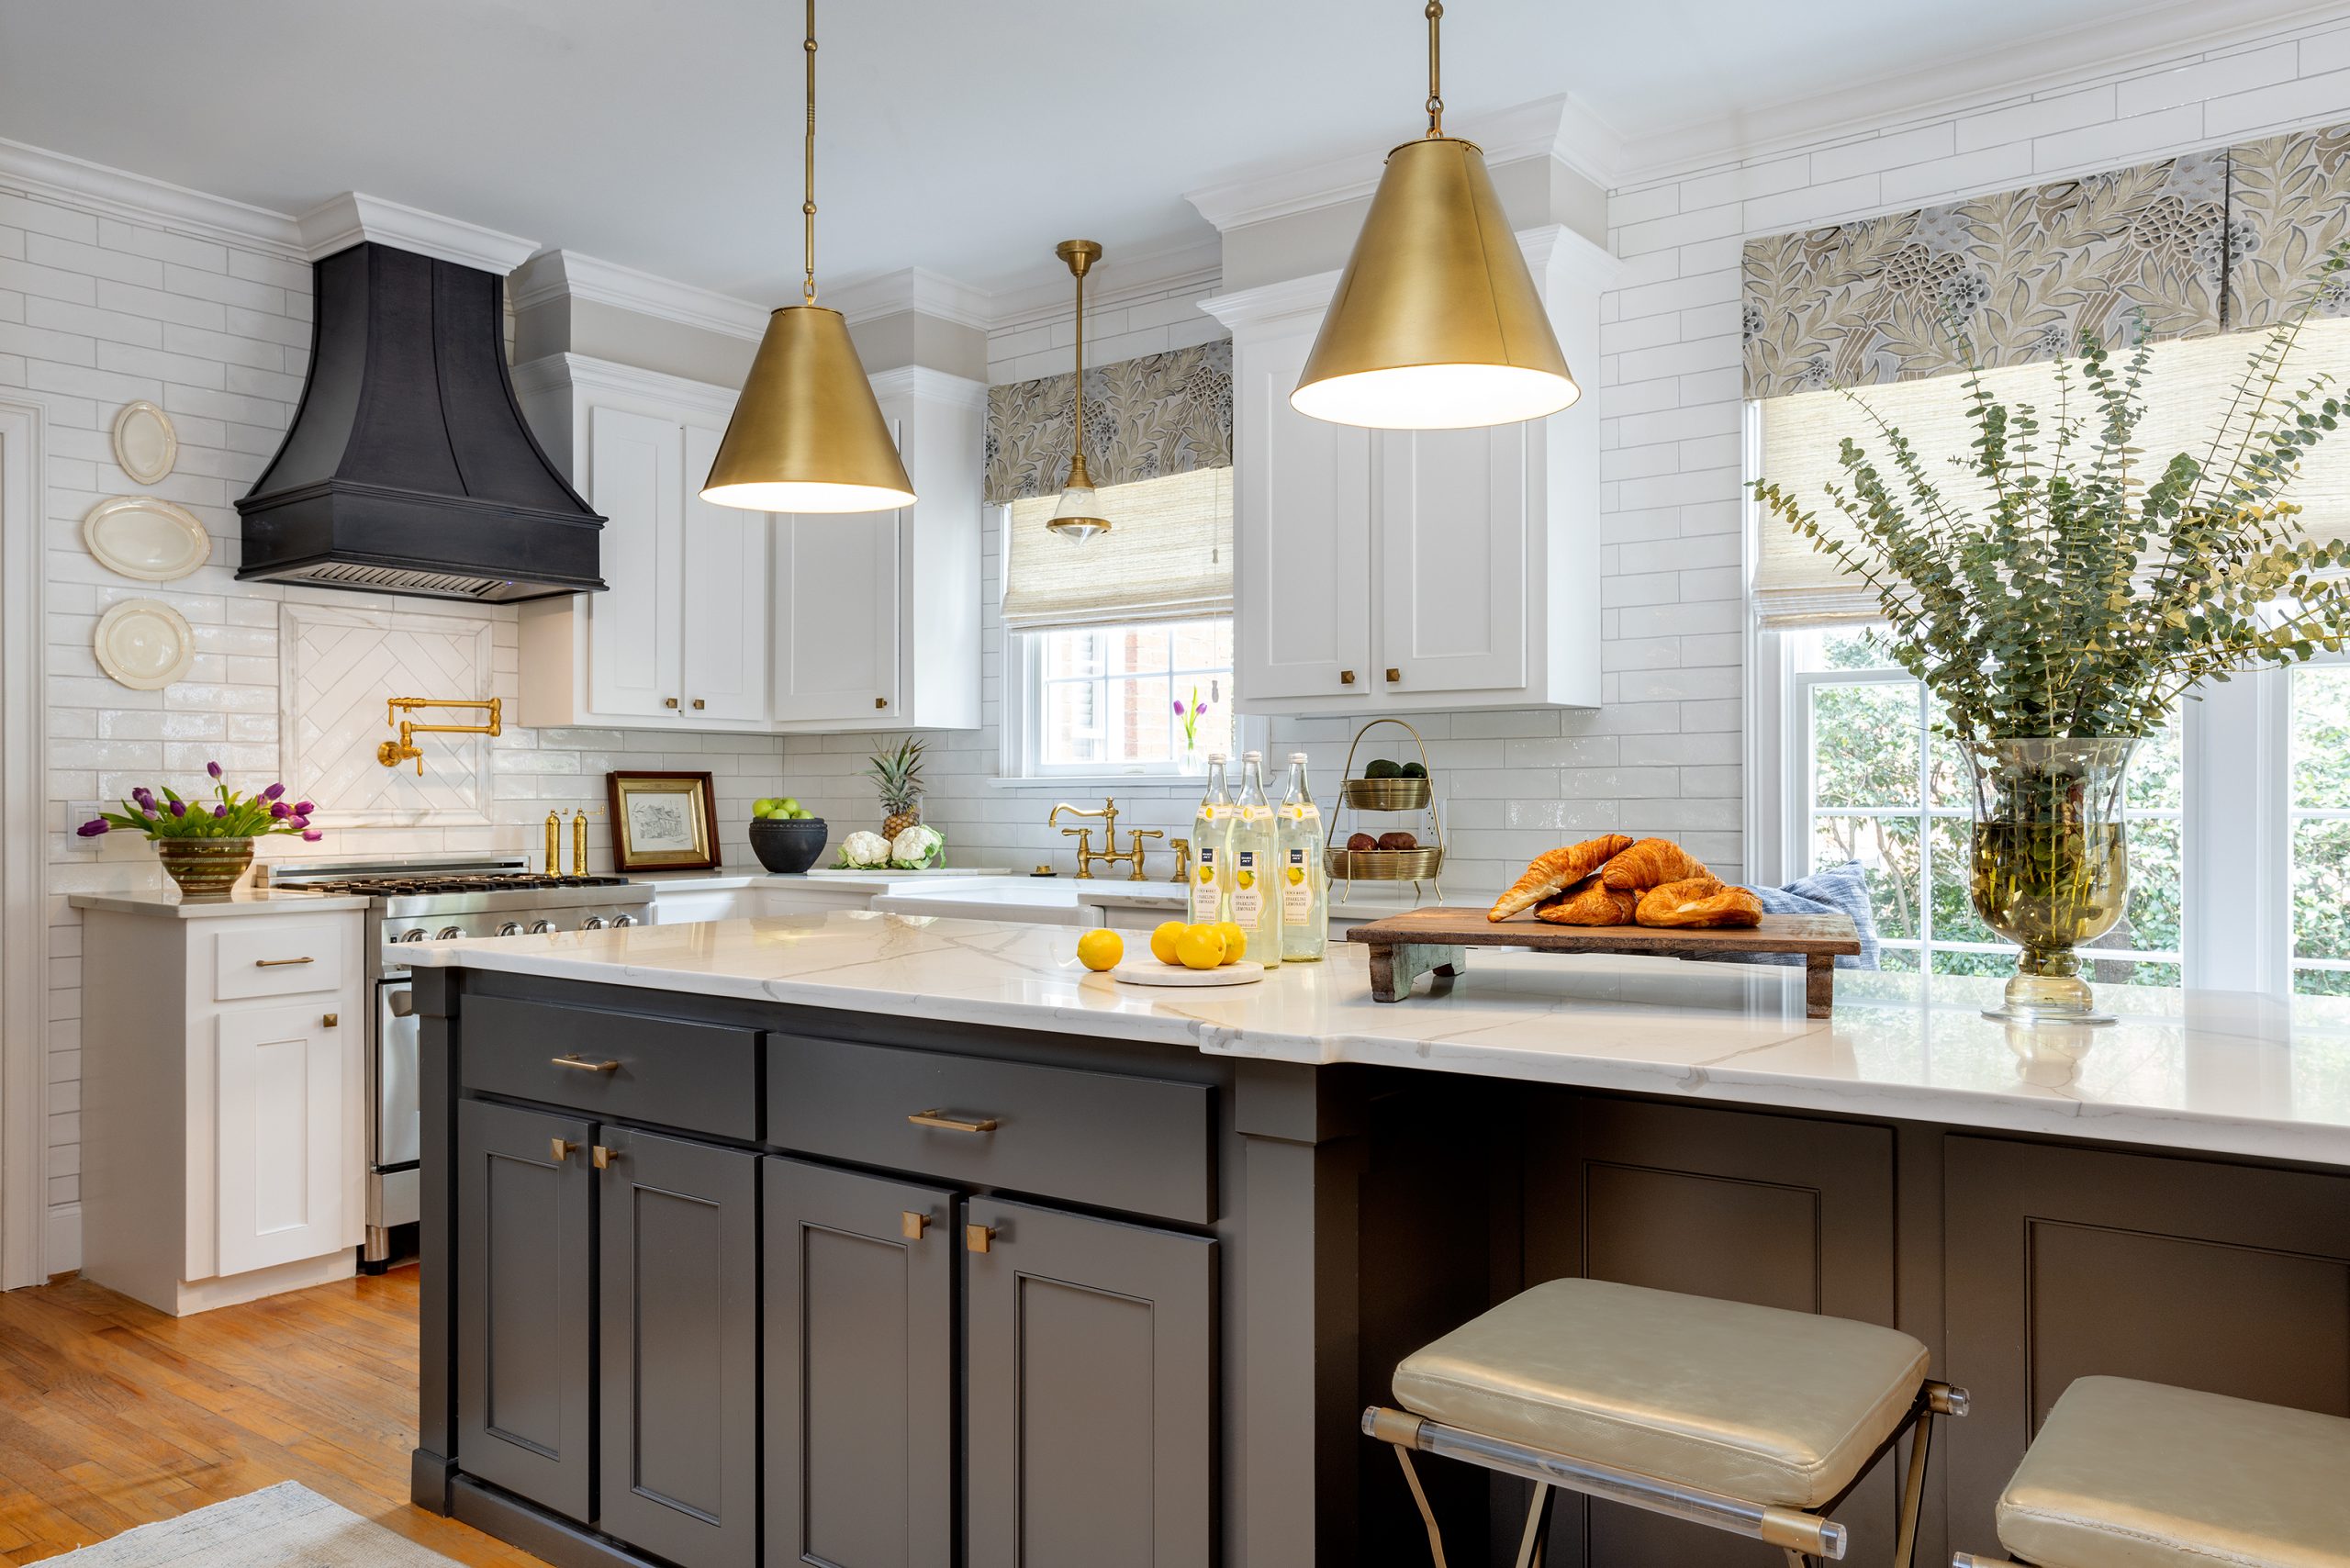 In 2019, with Veronica’s creativity and expertise, the Palmers began their renovations in the kitchen, where an existing peninsula was removed and a long island was installed down the middle. Once installed, the island extended and united the kitchen and breakfast area, which allowed for more seating and storage.